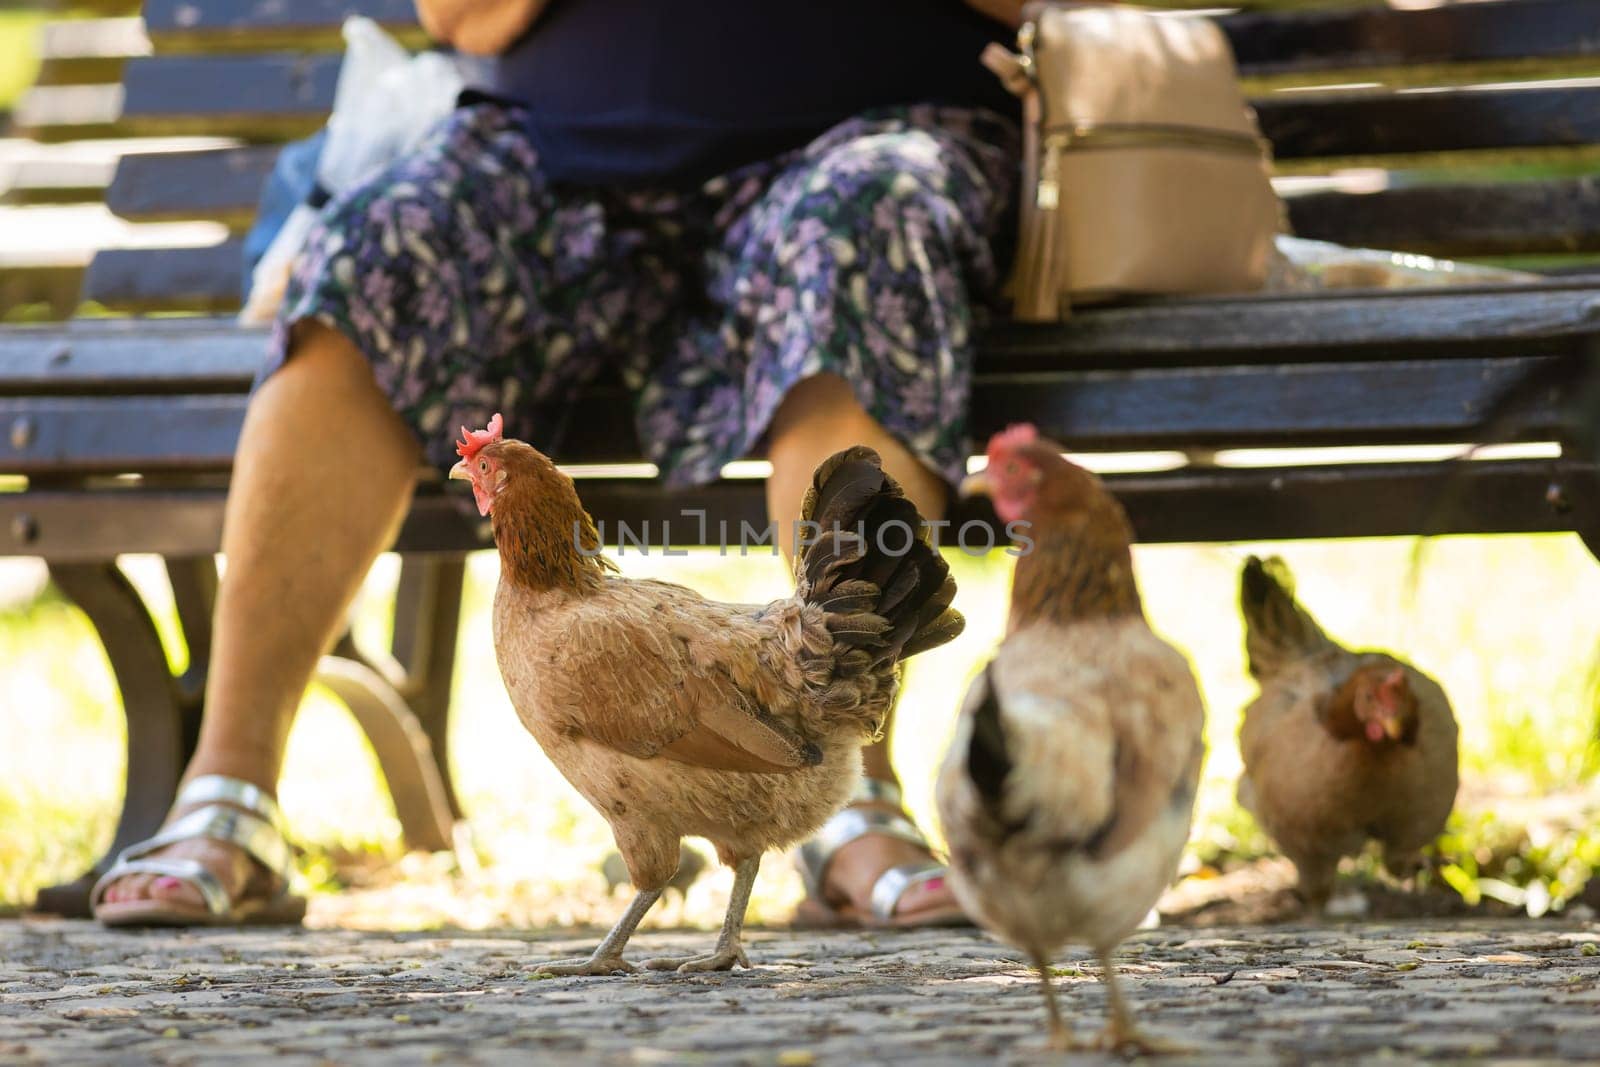 Chickens walk in the park near a bench with a person sitting on it. Mid shot